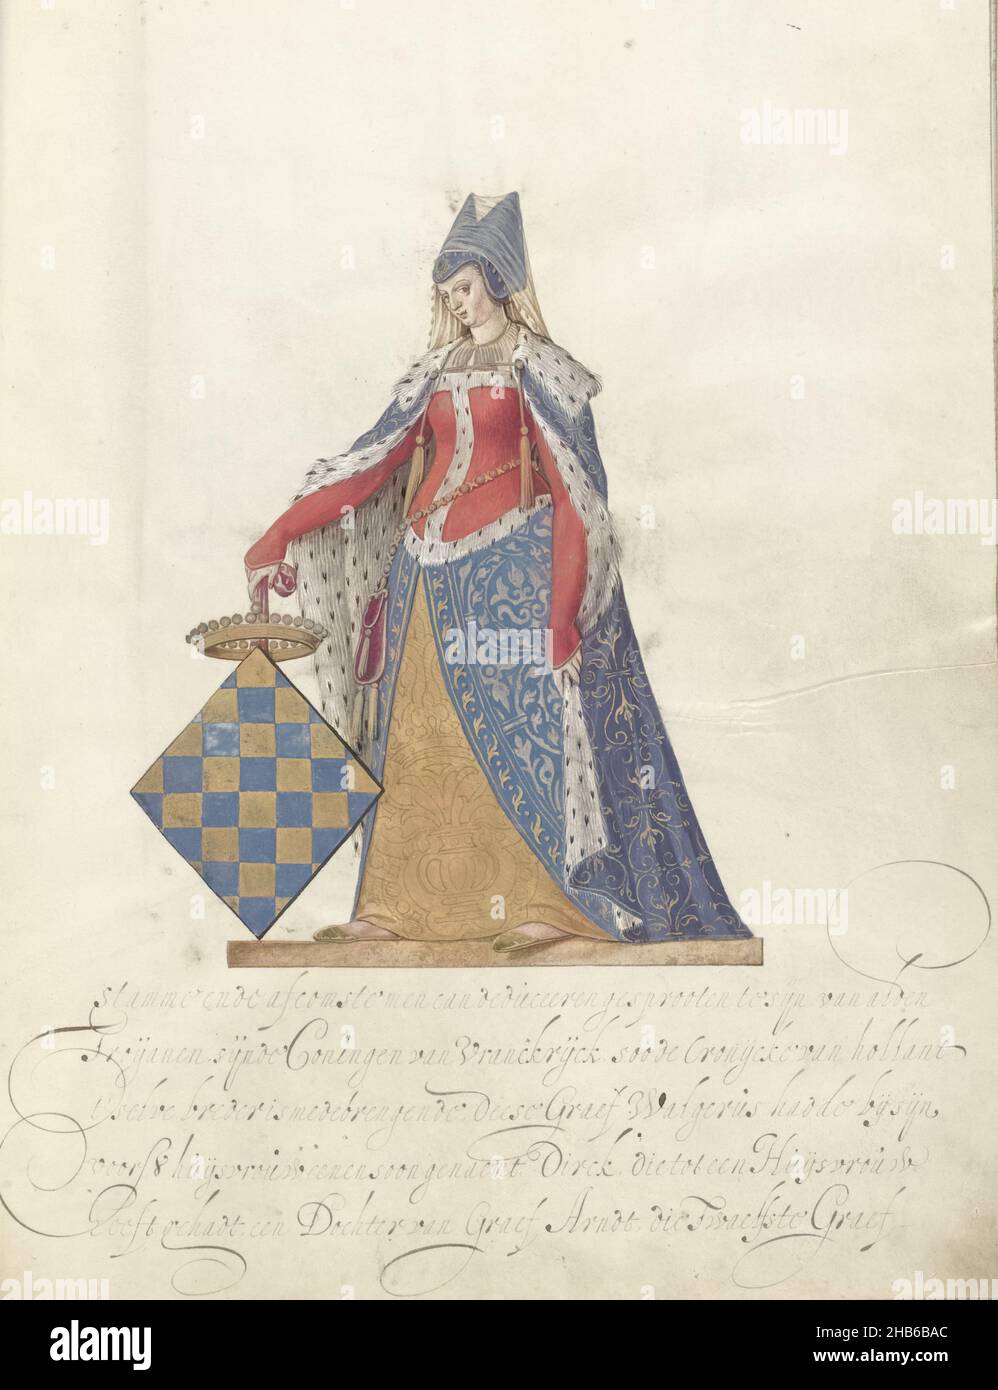 Countess of Teisterbant, Countess of Teisterbant, wife of Boudewijn Count of Teisterbant. She was daughter of the Count of Vermandois. Standing full-length with the coat of arms of Vermandois. Part of illustrated manuscript containing the genealogy of the lords and counts of Culemborg., draughtsman: Nicolaes de Kemp (attributed to), anonymous, Northern Netherlands, c. 1590 - c. 1593 and/or c. 1600 - c. 1625, parchment (animal material), ink, painting, writing (processes), height 398 mm × width 292 mm Stock Photo